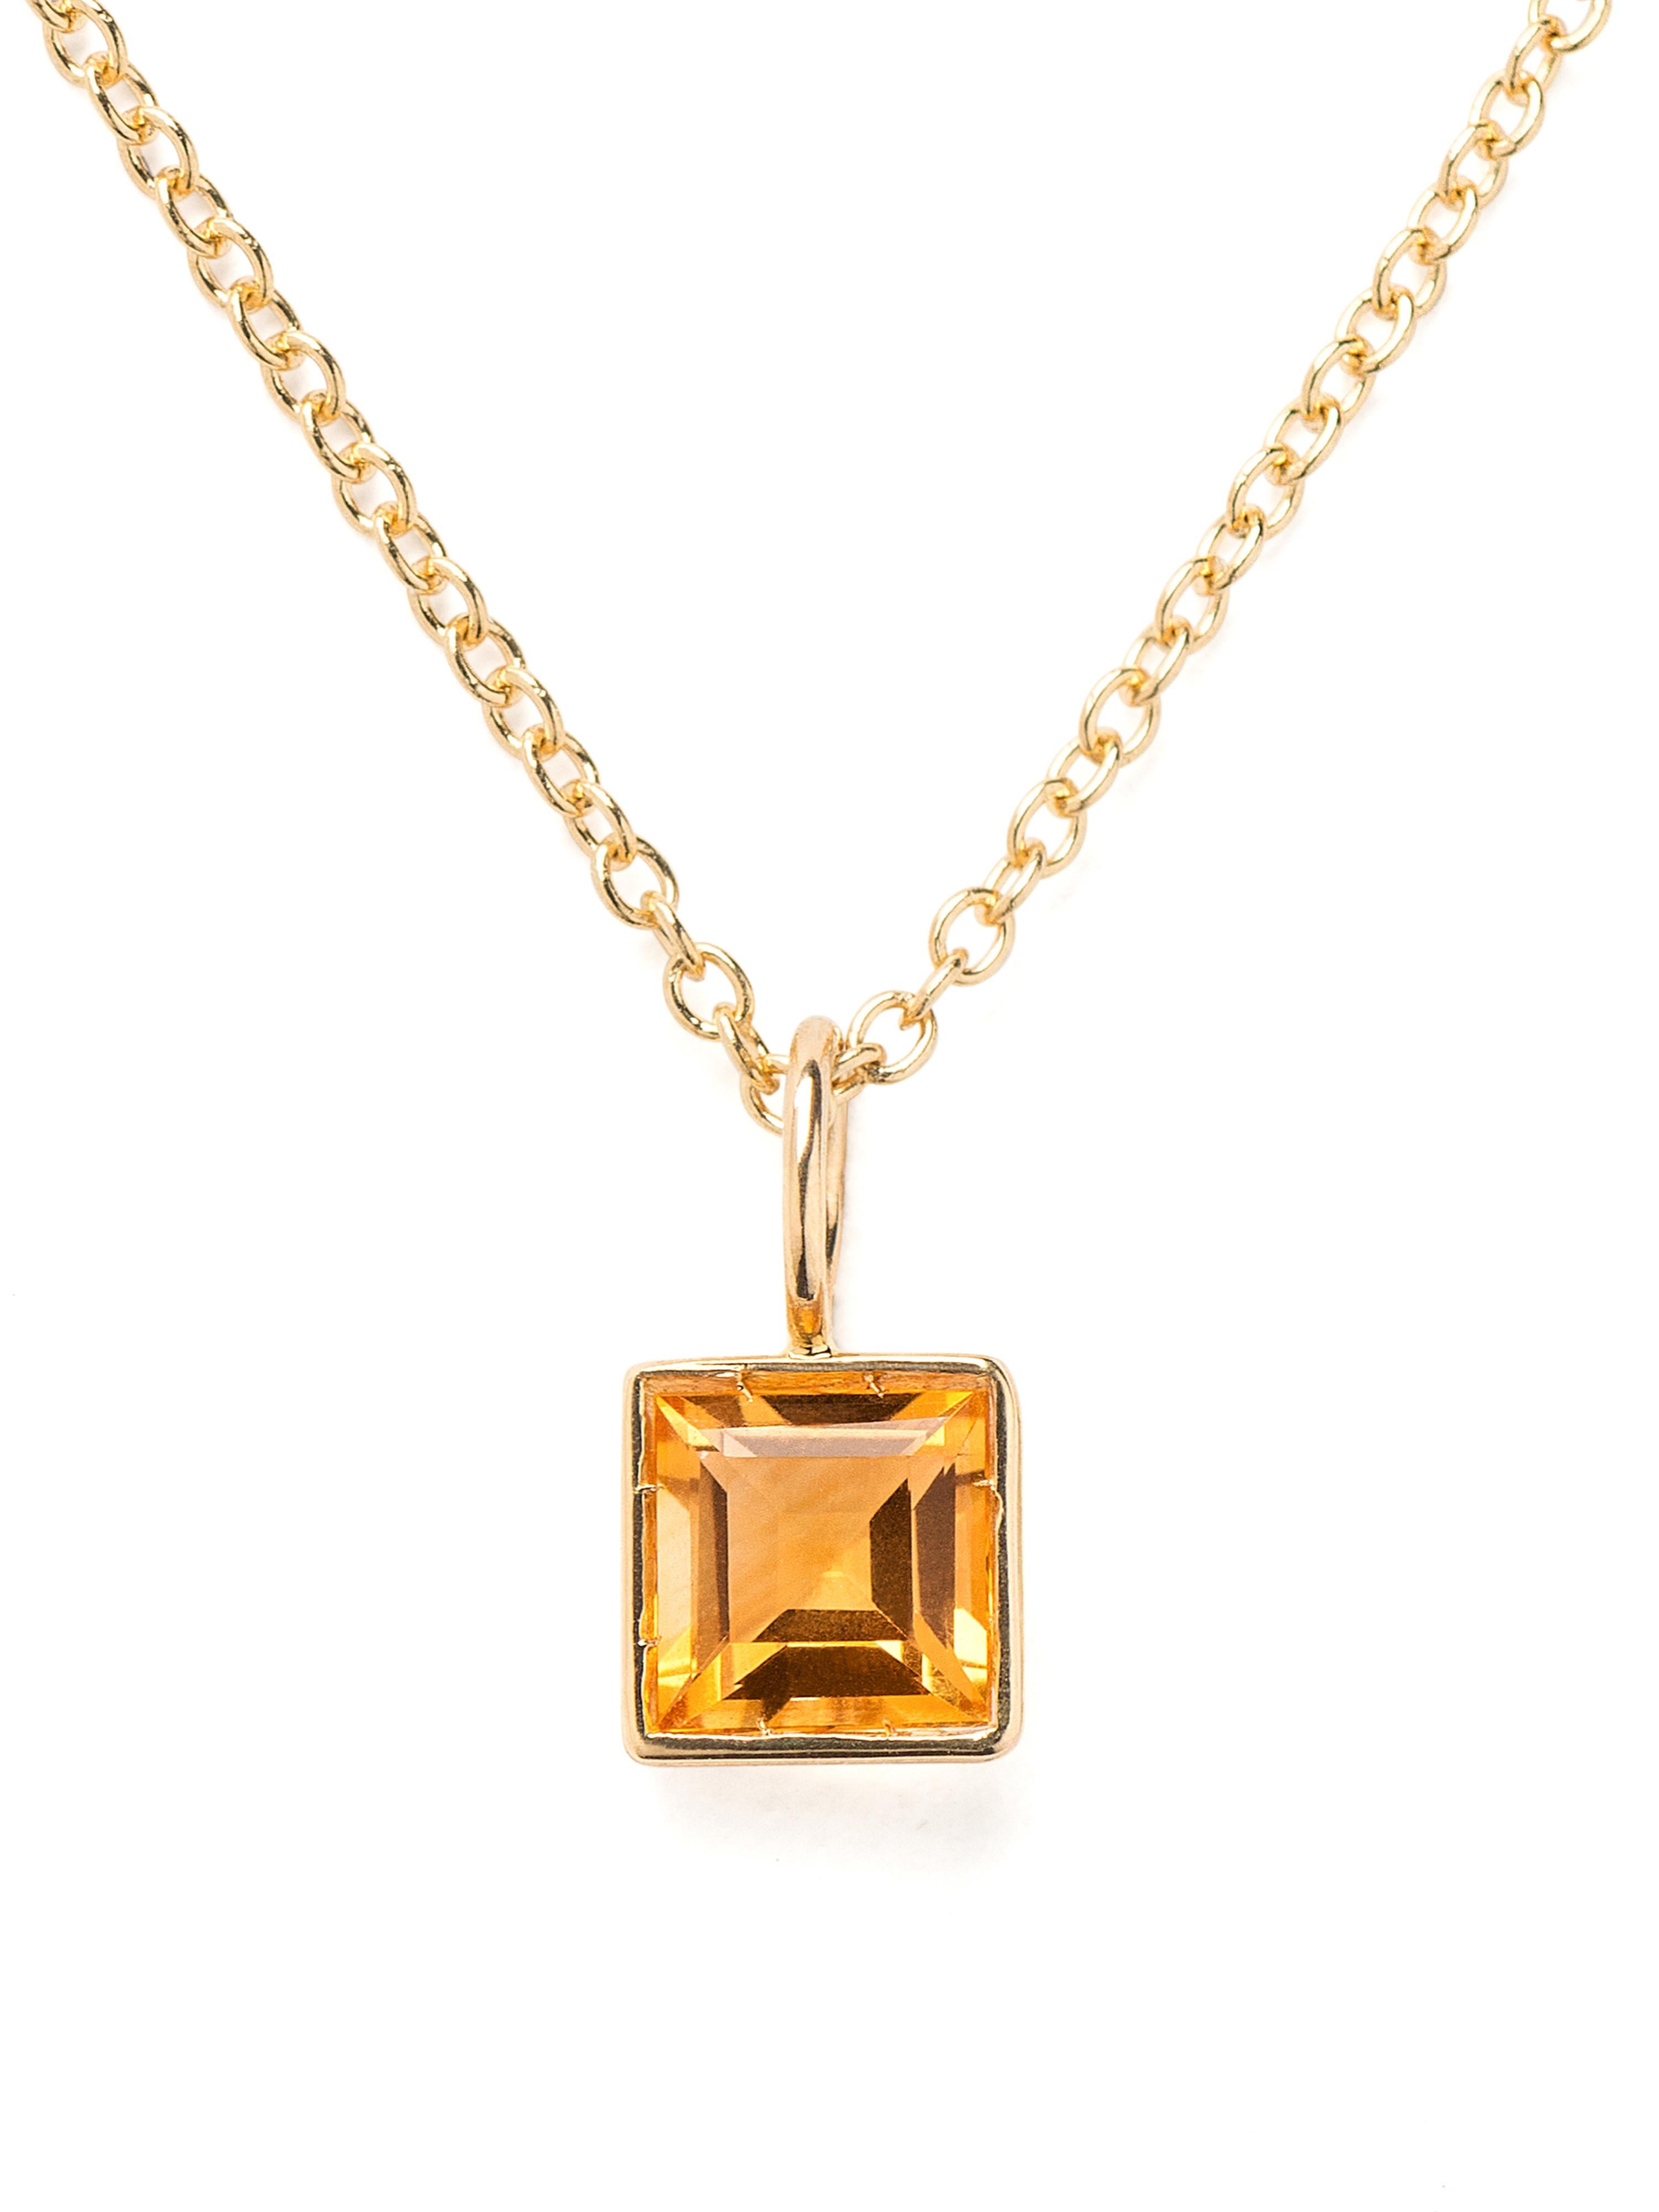 Please note that the carat weight, number of stones and dimensions of the product are indicative and may vary depending on the size of the creation chosen.

Size of the pattern: 6.5x6.5 mm
Stone : citrine - 0.5 carat
Shape : square
Average gold